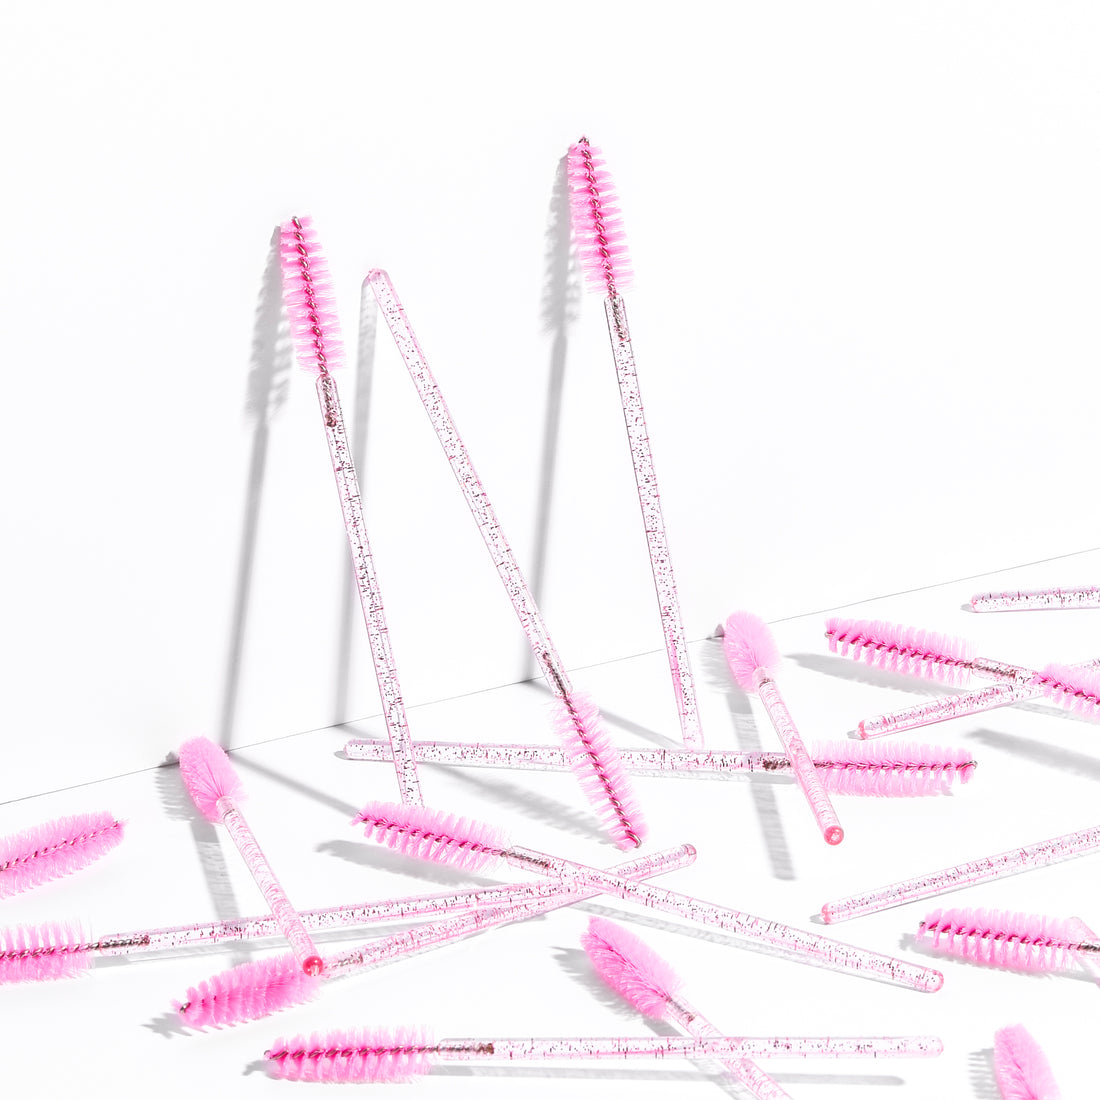 Disposable eyelash brushes are scattered against a white background